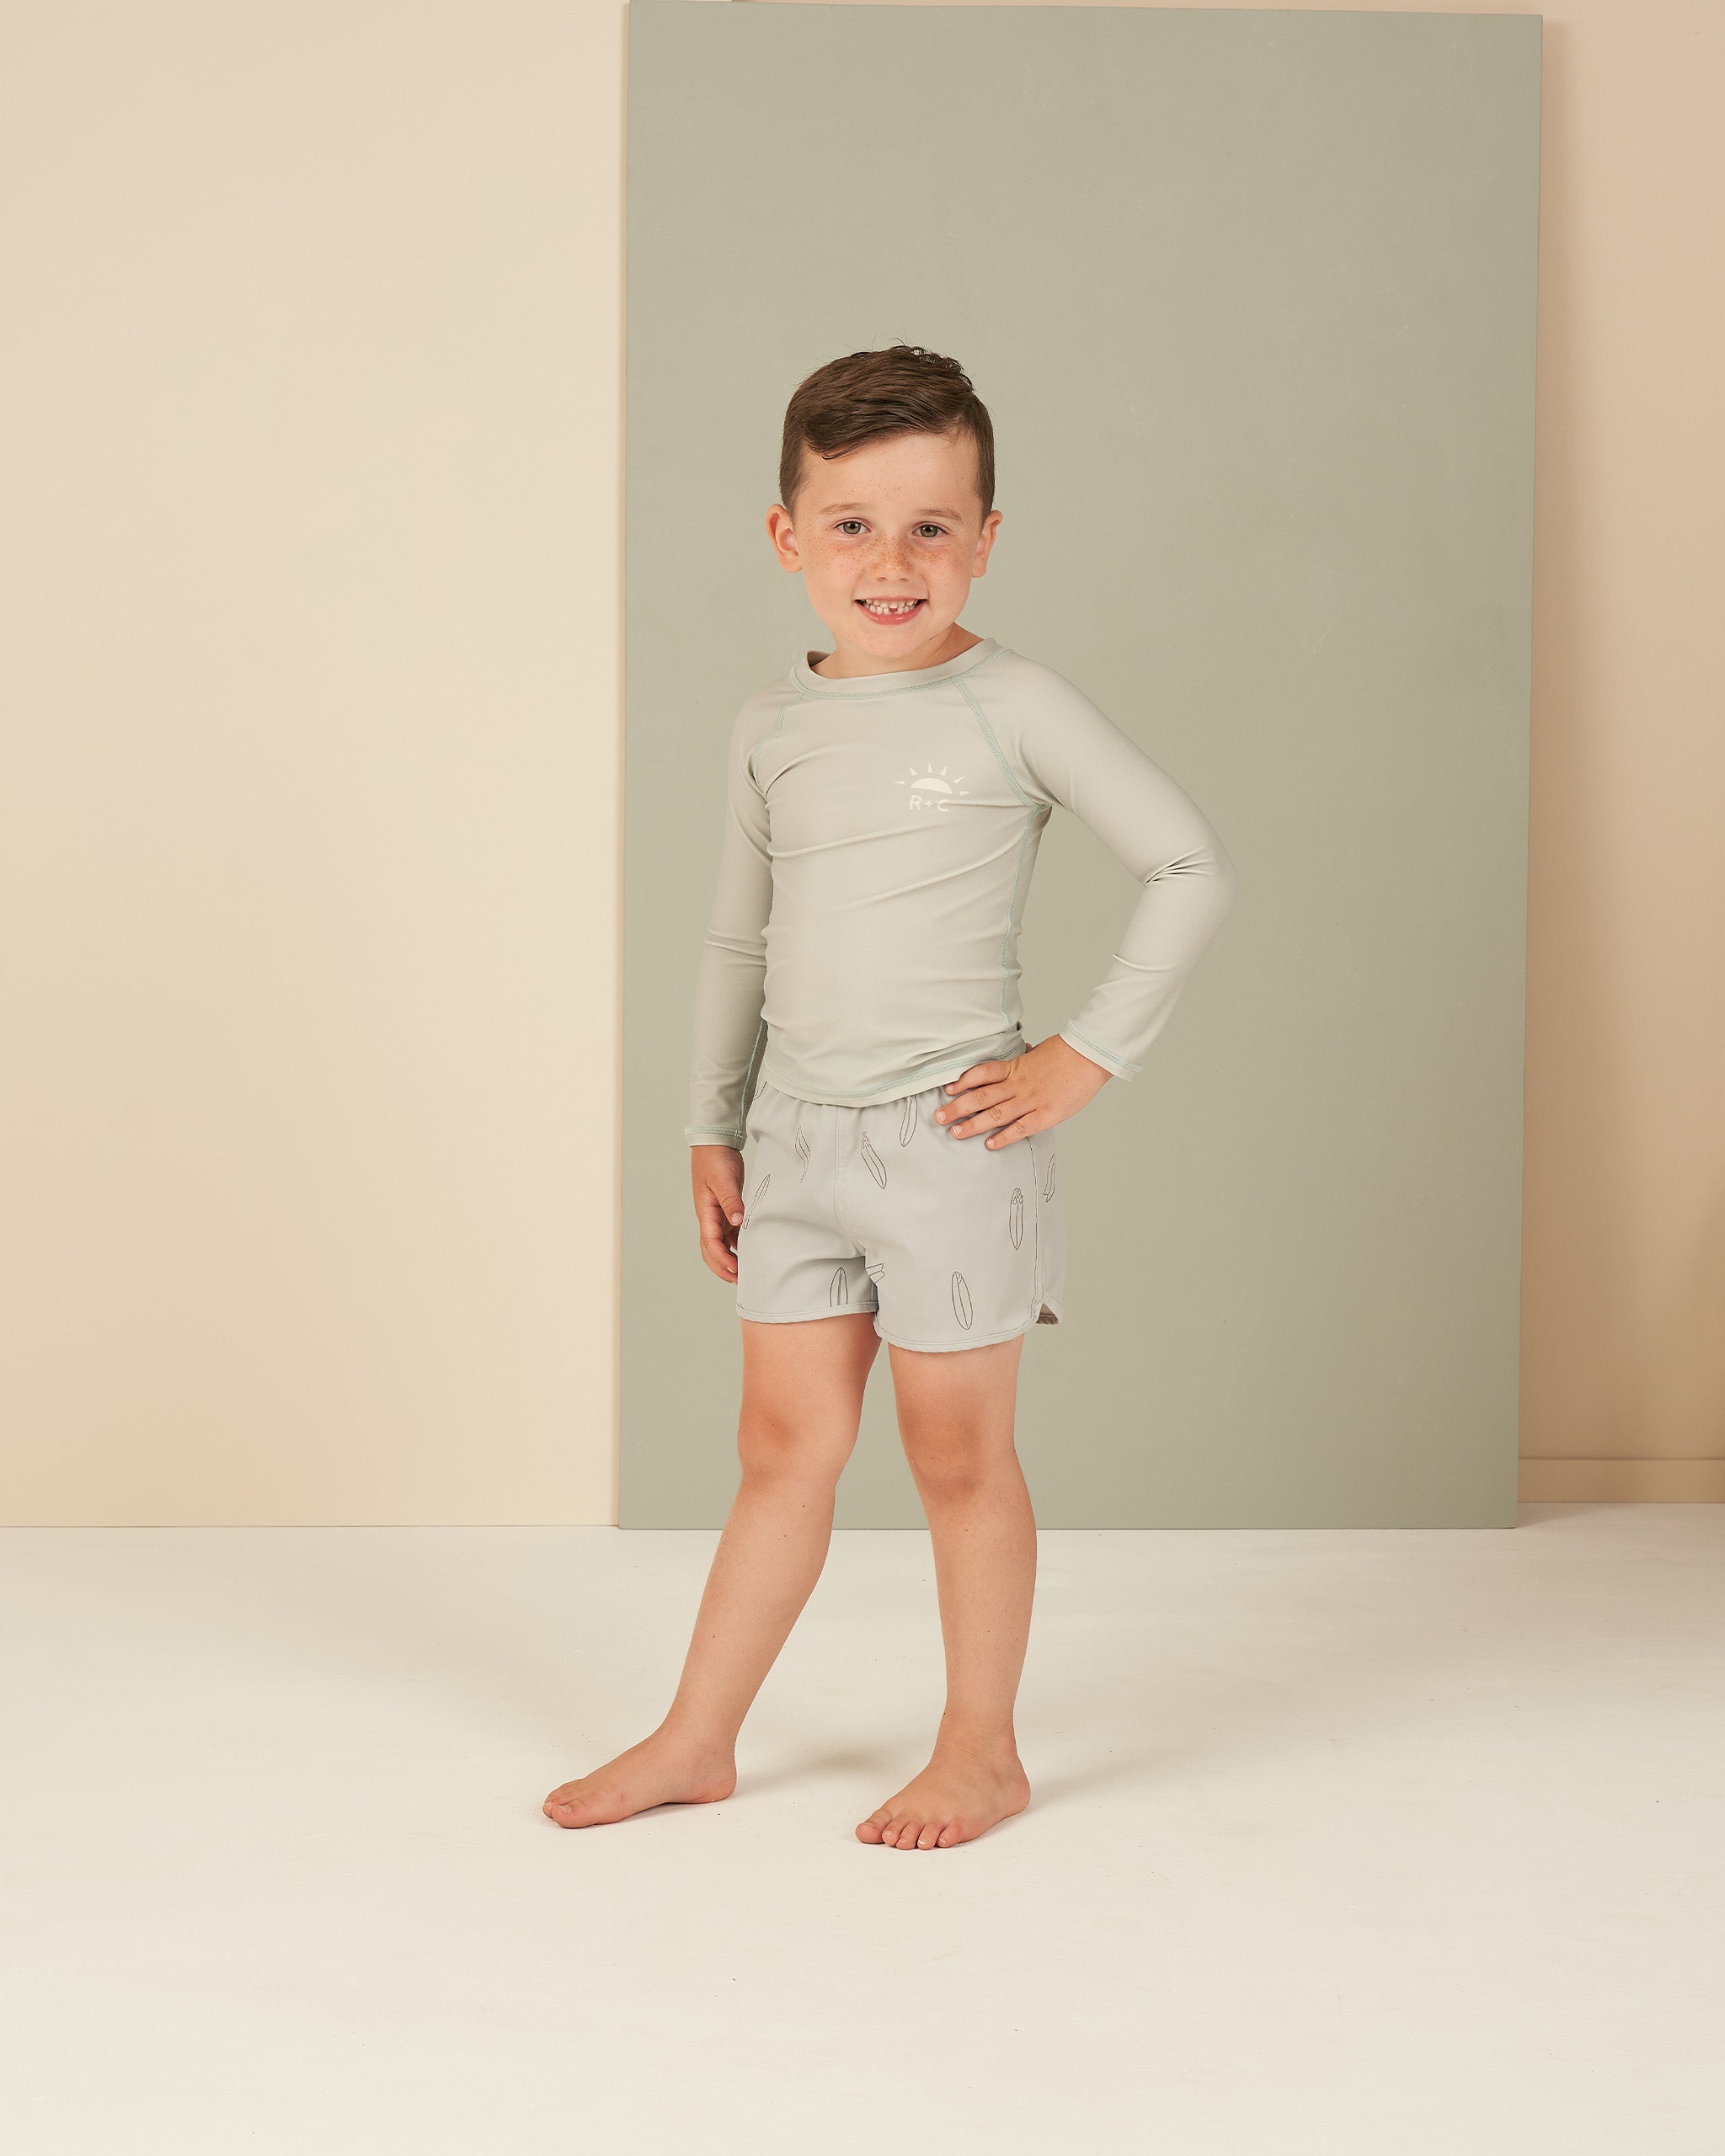 Rash Guard || Seafoam - Rylee + Cru | Kids Clothes | Trendy Baby Clothes | Modern Infant Outfits |